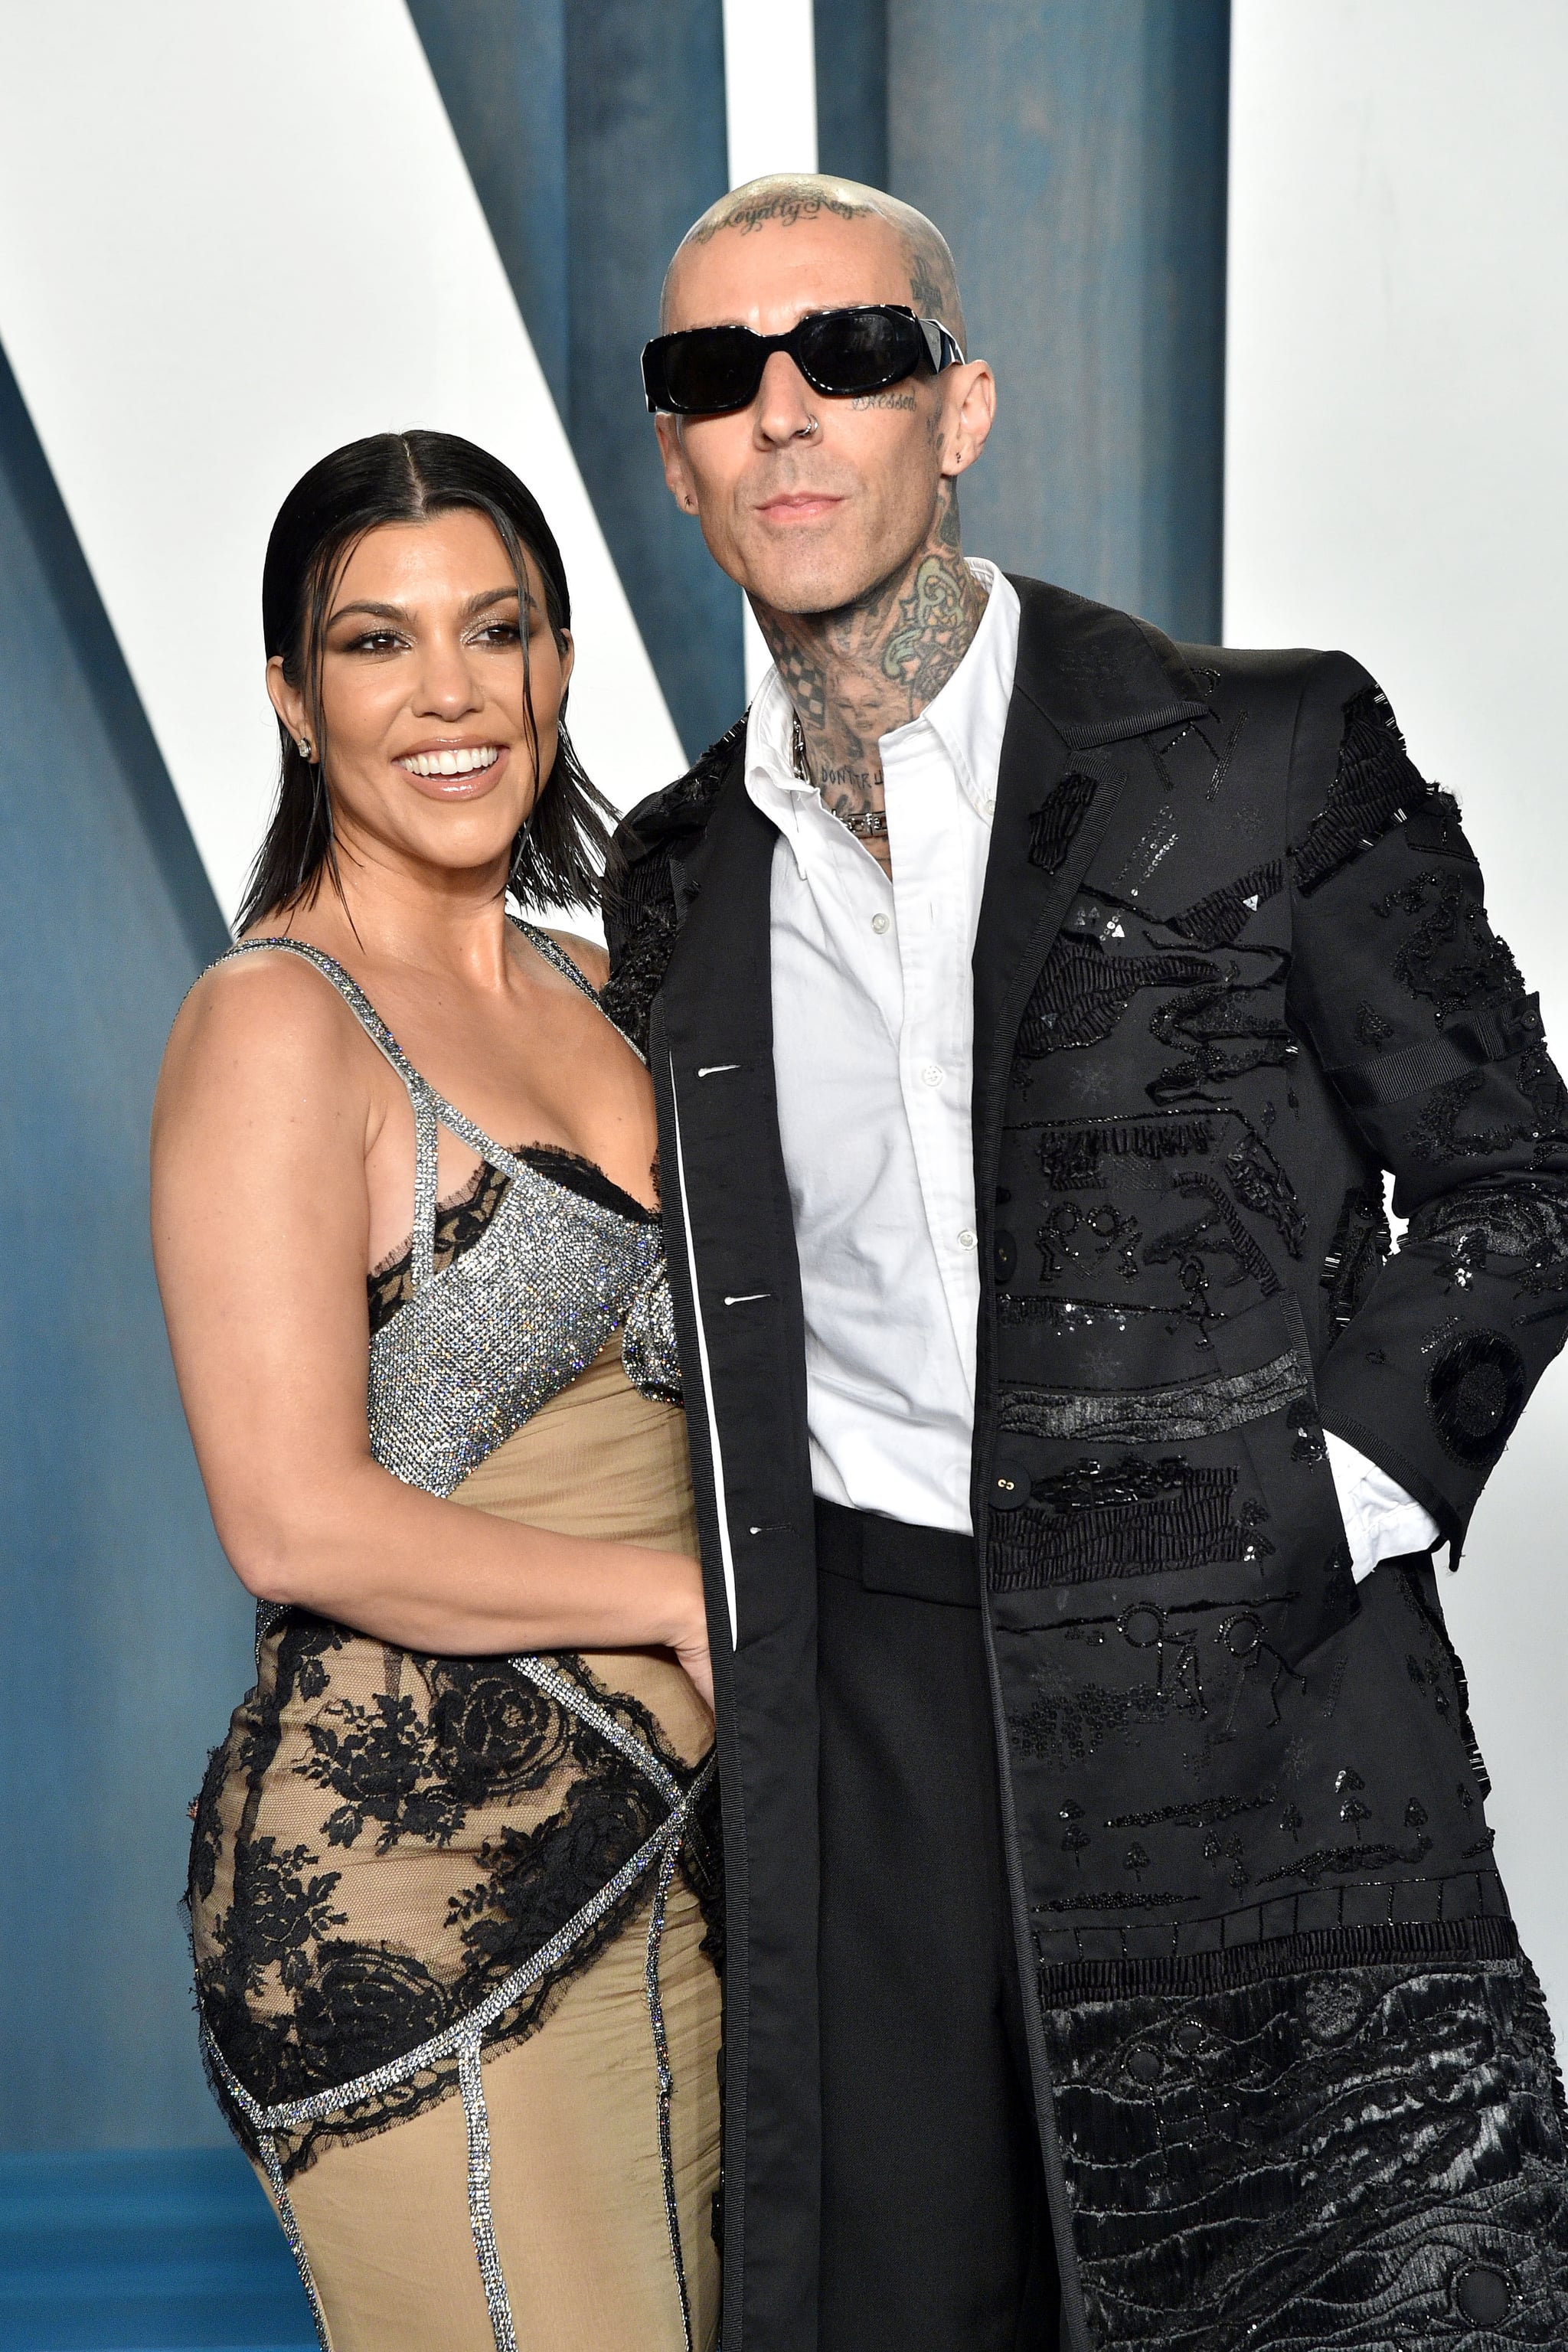 BEVERLY HILLS, CALIFORNIA - MARCH 27: Kourtney Kardashian and Travis Barker attend the 2022 Vanity Fair Oscar Party hosted by Radhika Jones at Wallis Annenberg Centre for the Performing Arts on March 27, 2022 in Beverly Hills, California. (Photo by Lionel Hahn/Getty Images)